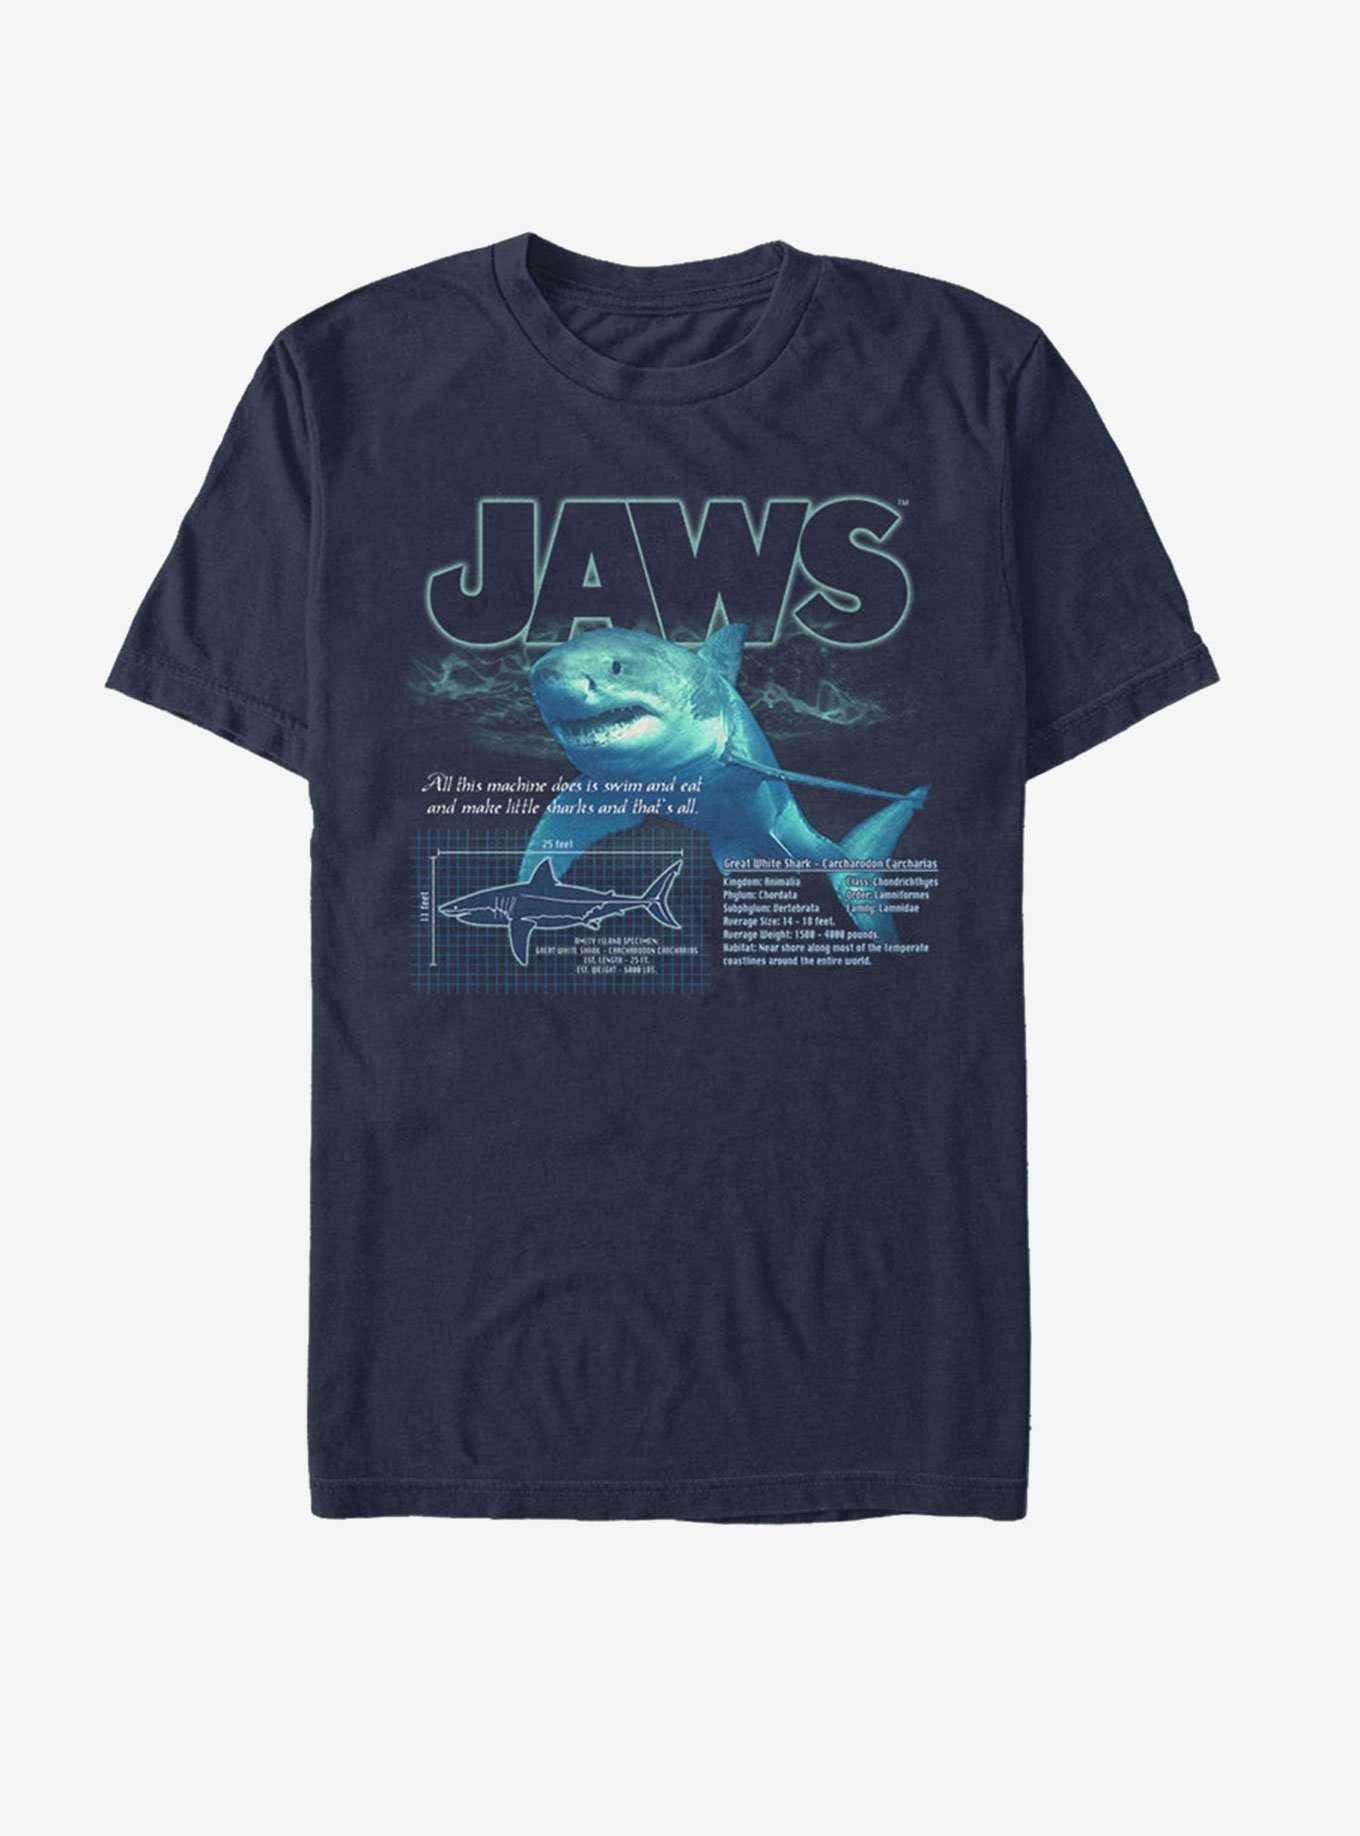 OFFICIAL Jaws T-Shirts & Merchandise